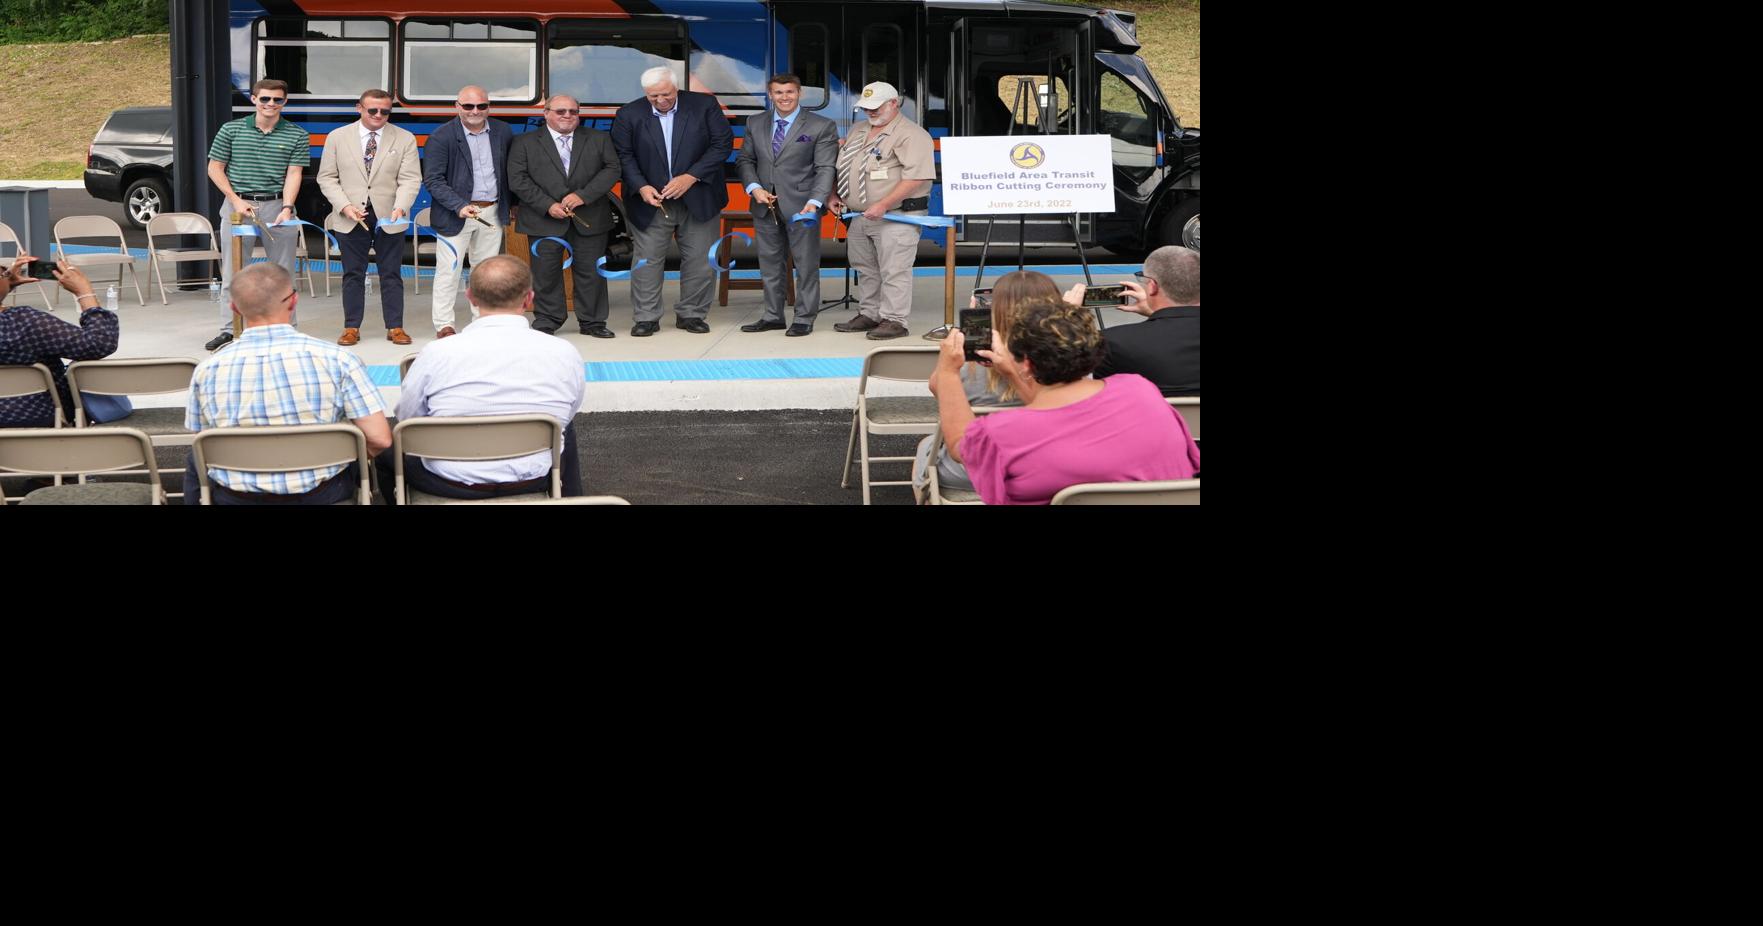 West Virginia governor attends Bluefield Area Transit Regional Transfer Station ribbon-cutting